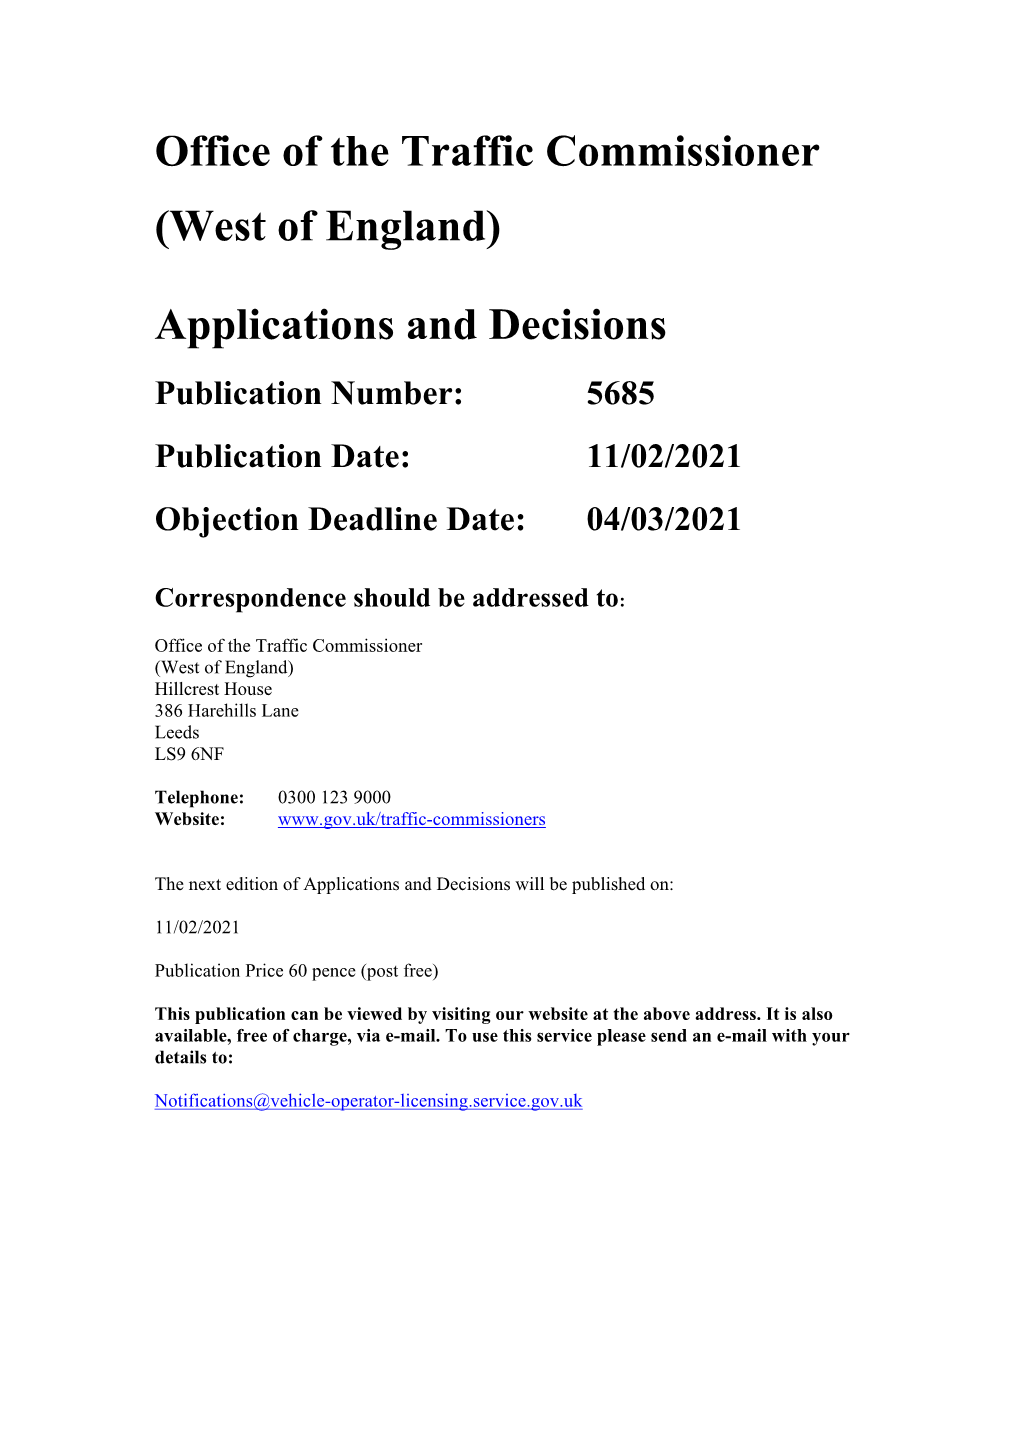 Applications and Decisions for the West of England 5685